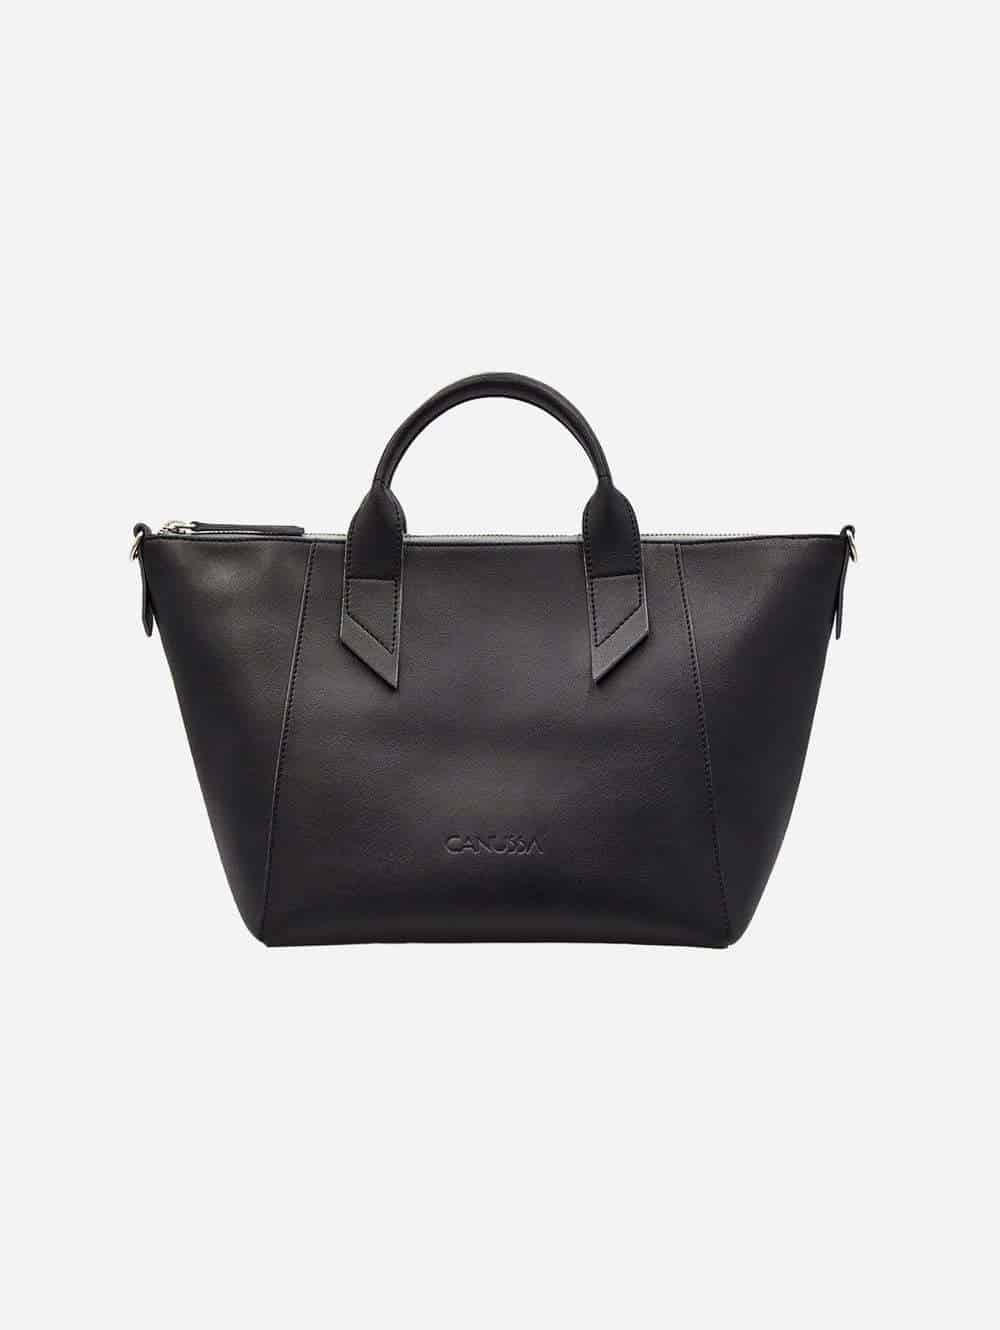 Black vegan leather bag with black strap from Canussa